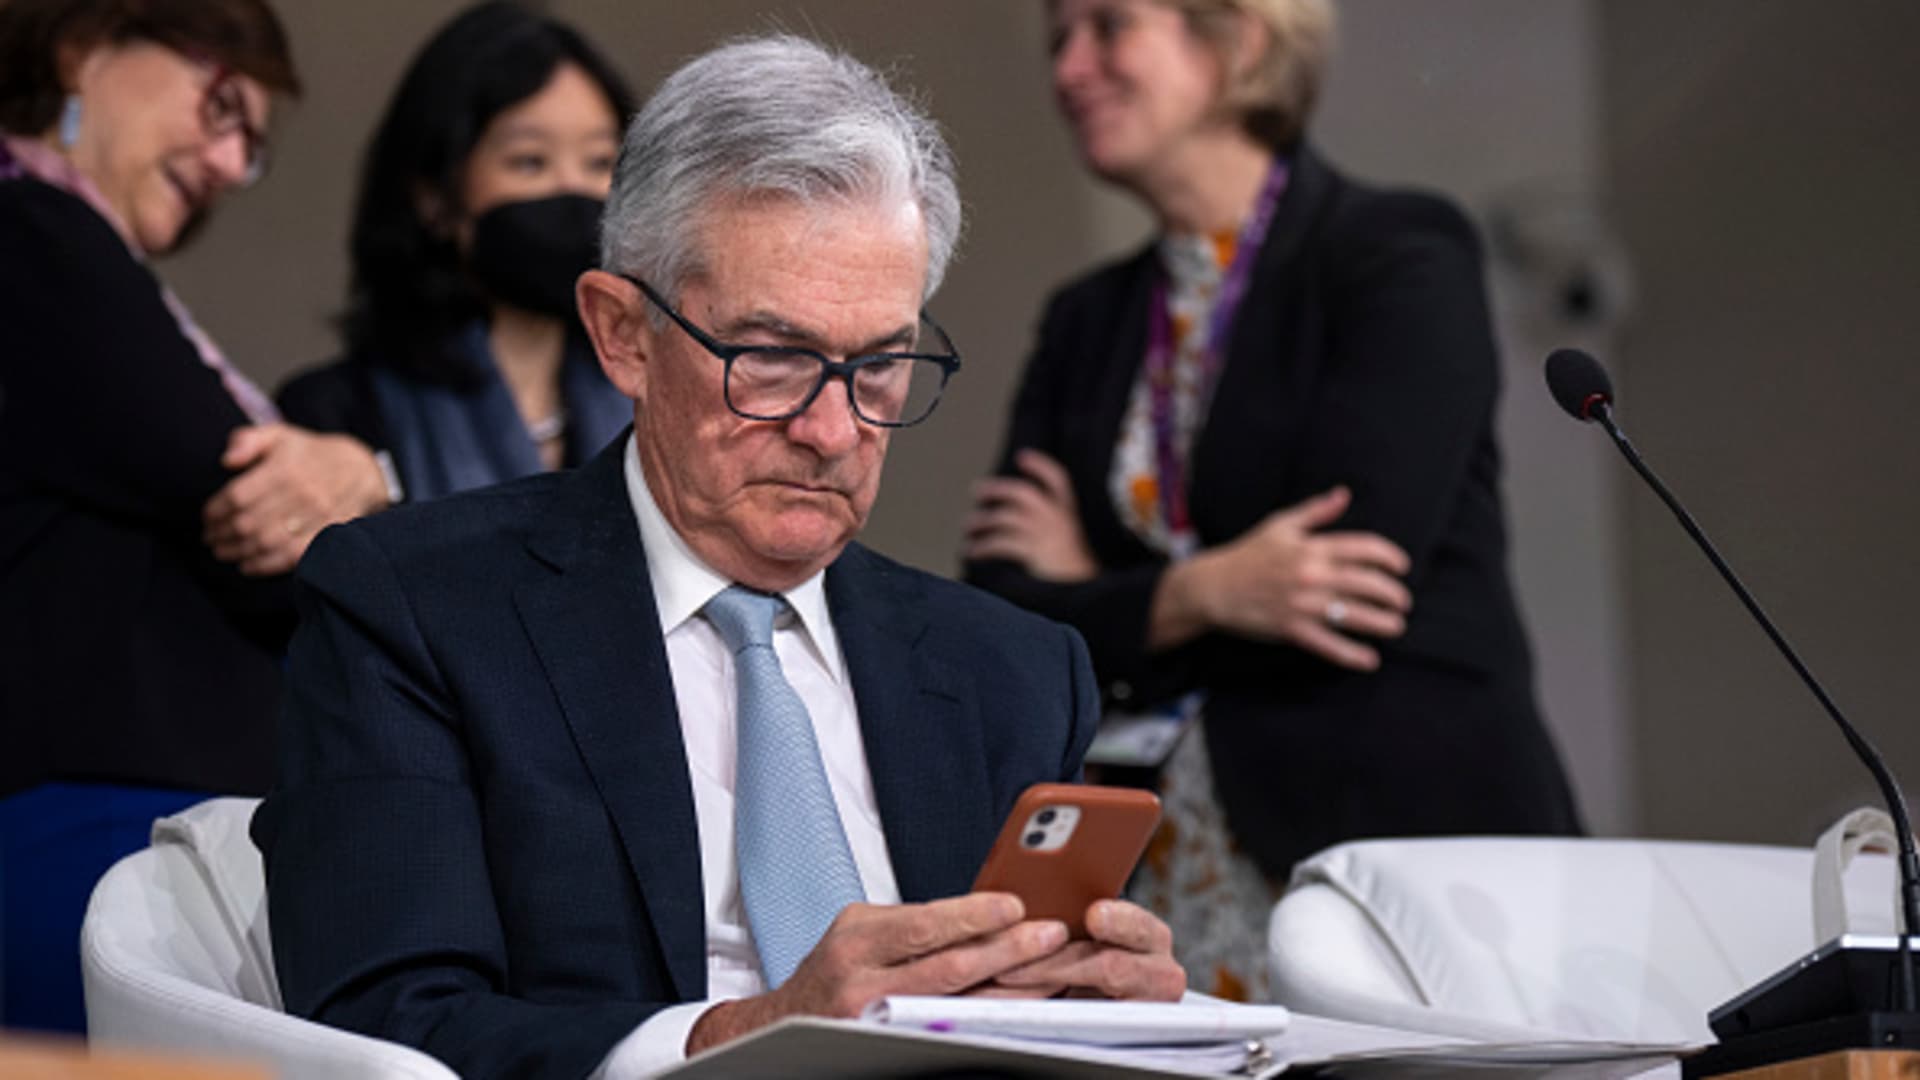 The two words investors want to hear from Wednesday's Federal Reserve meeting